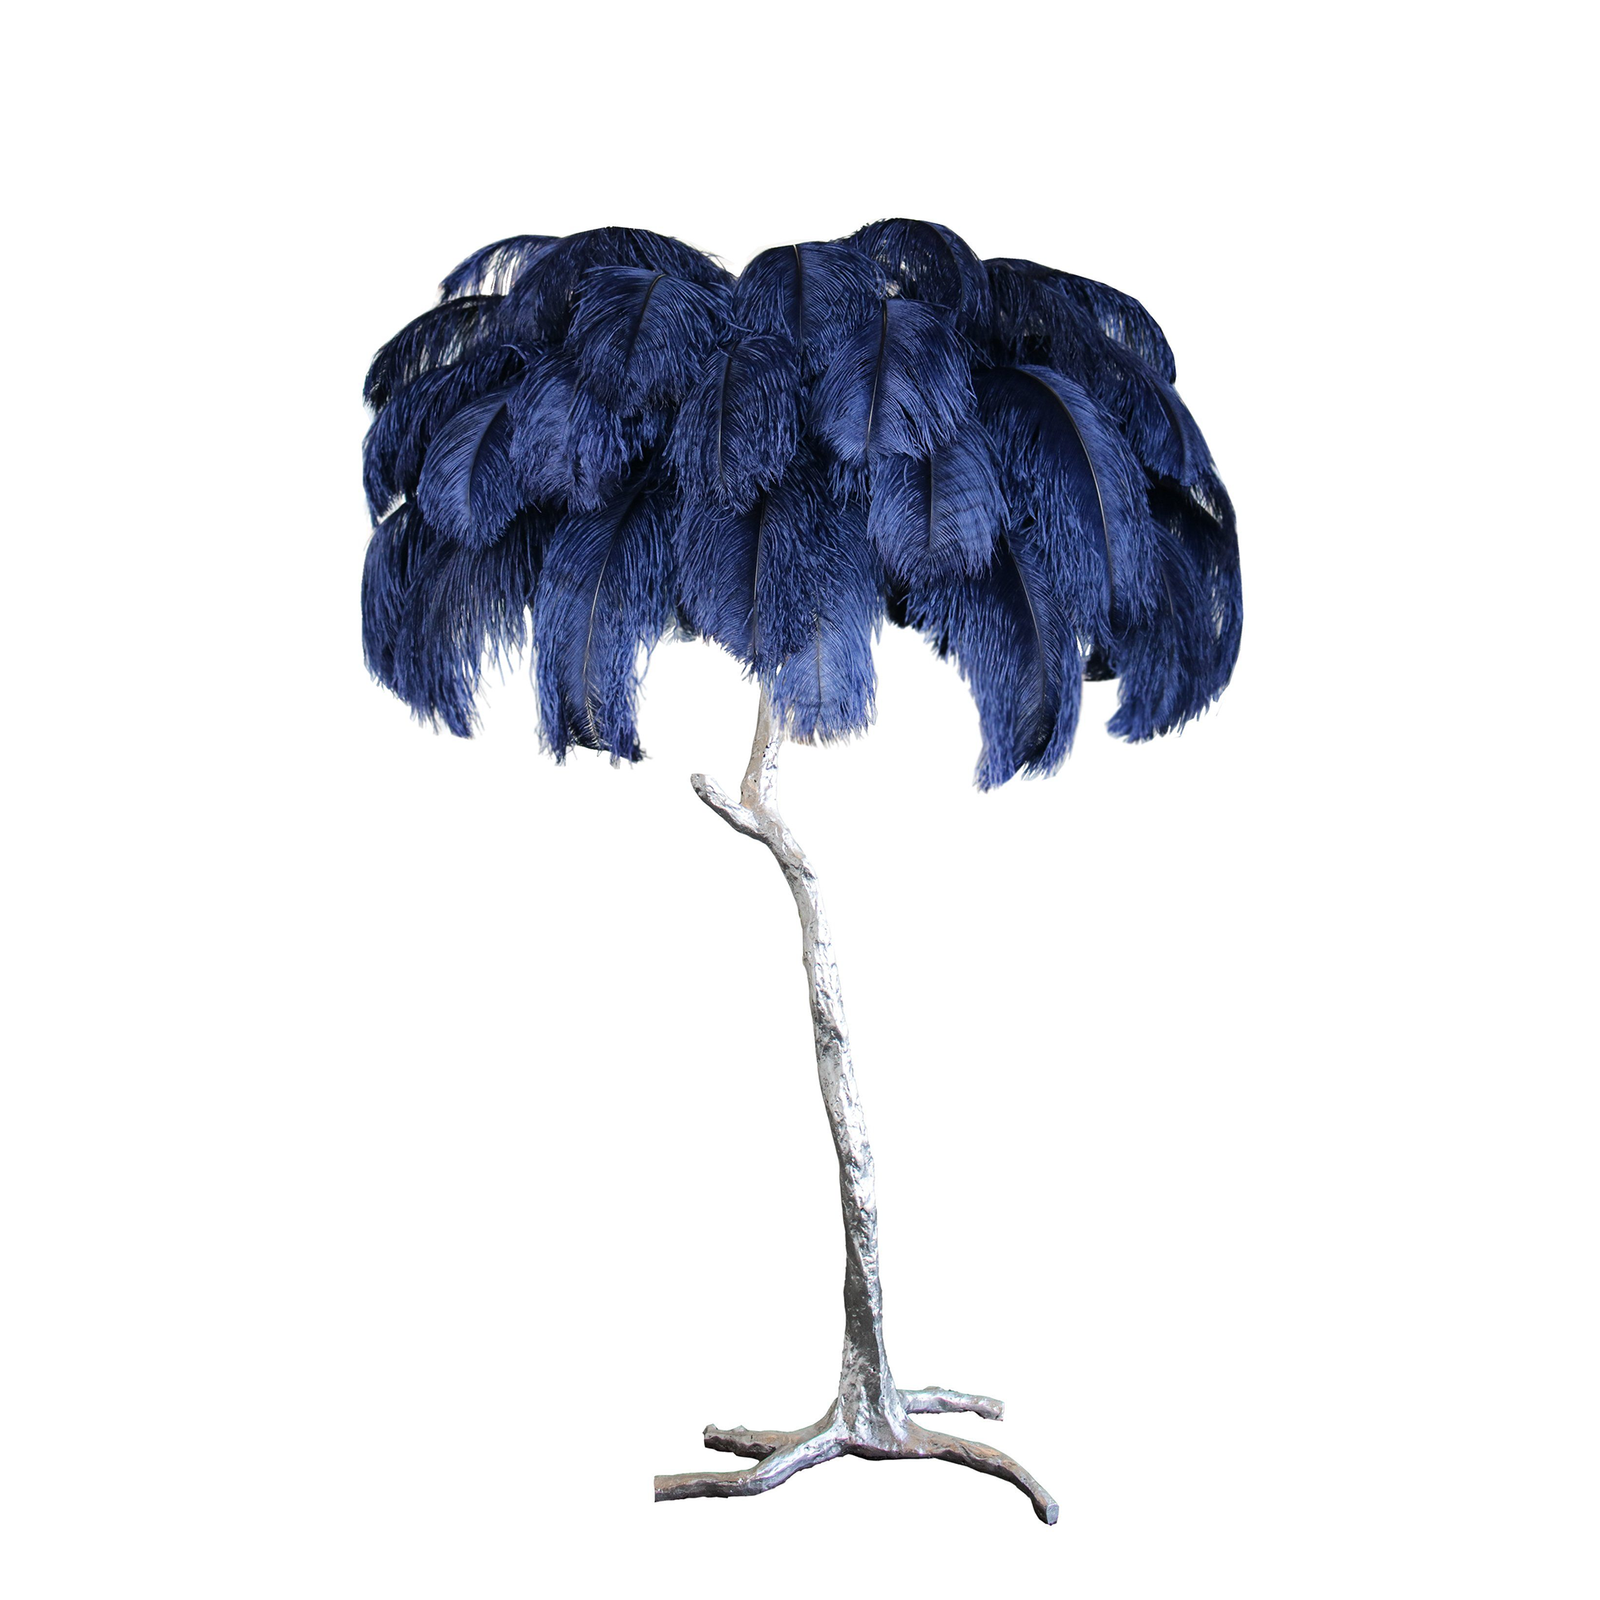 Resin Floor Light with Ostrich Feathers in Silver and Navy, Diameter 39.4" x Height 63" (100cm x 160cm)